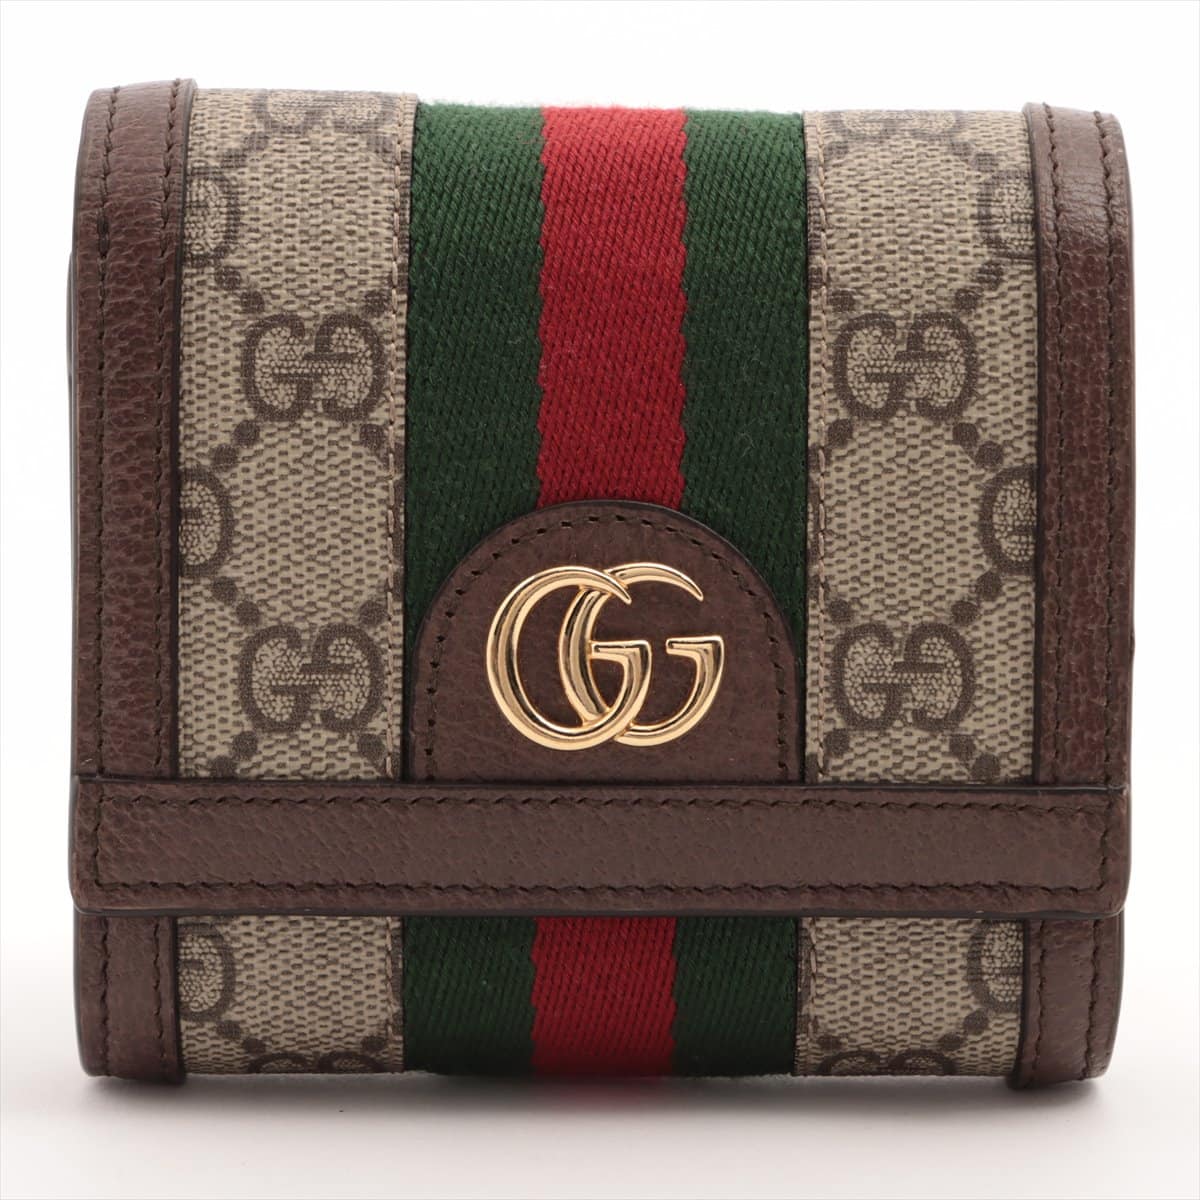 Gucci 598662 PVC & leather Compact Wallet Beige